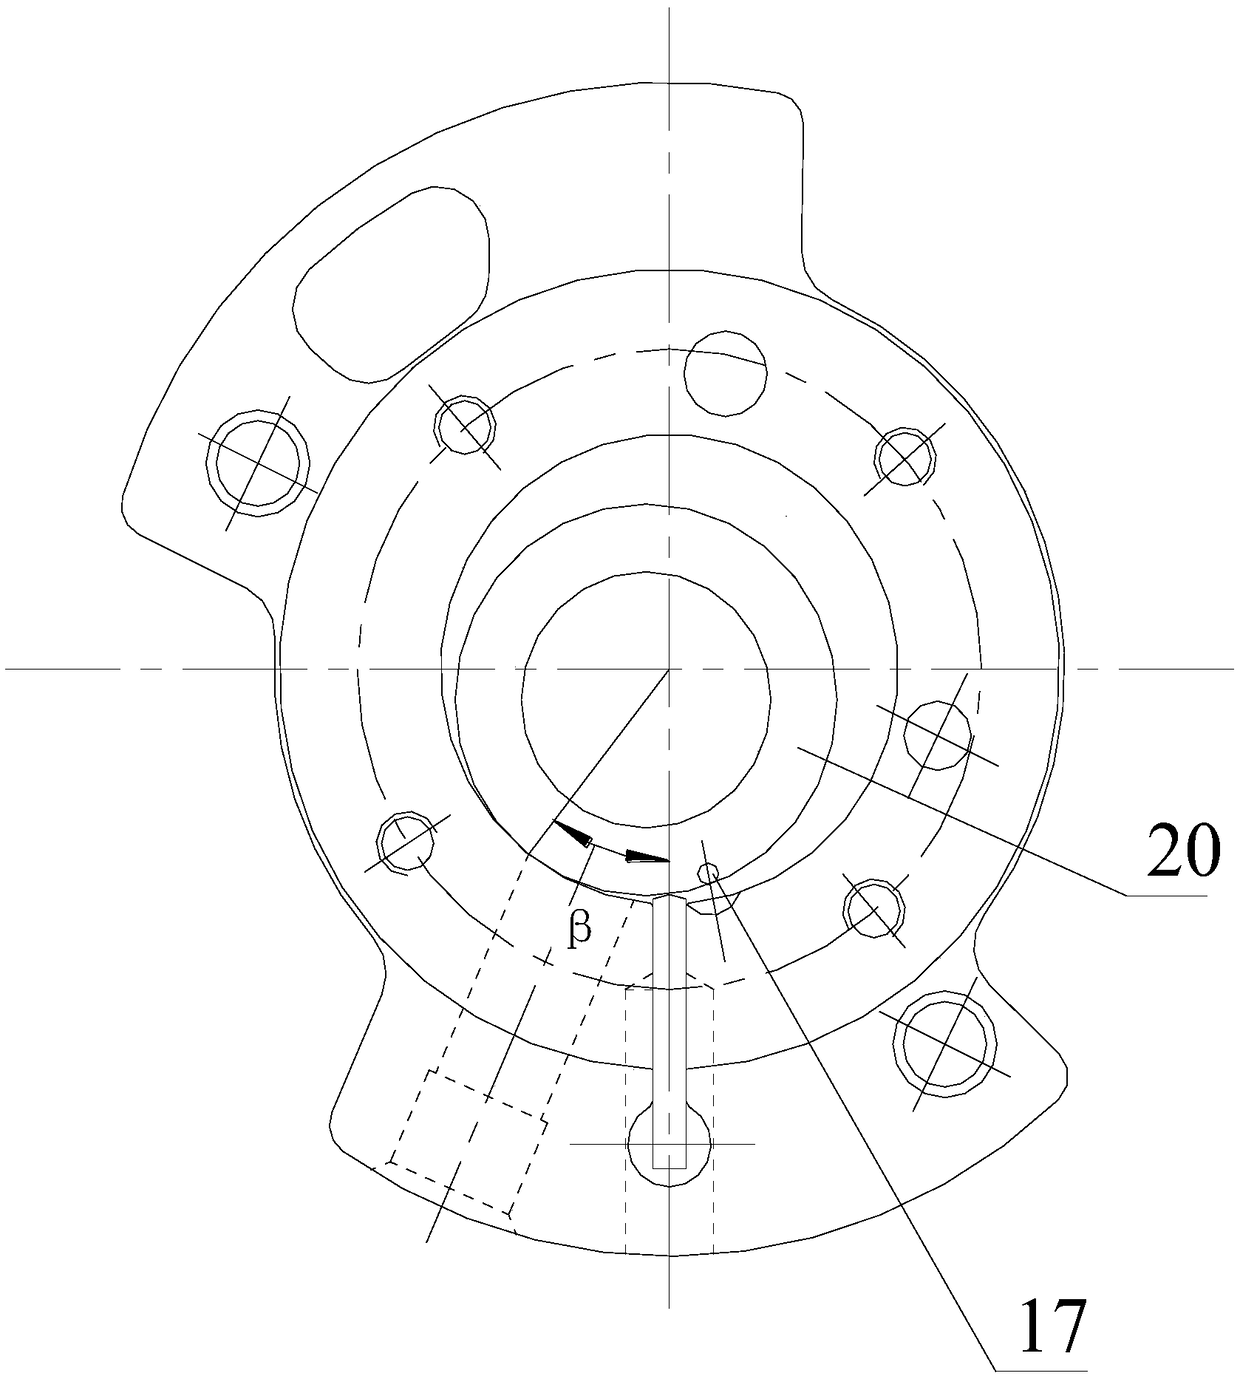 Rotary compressor and electrical products including the same